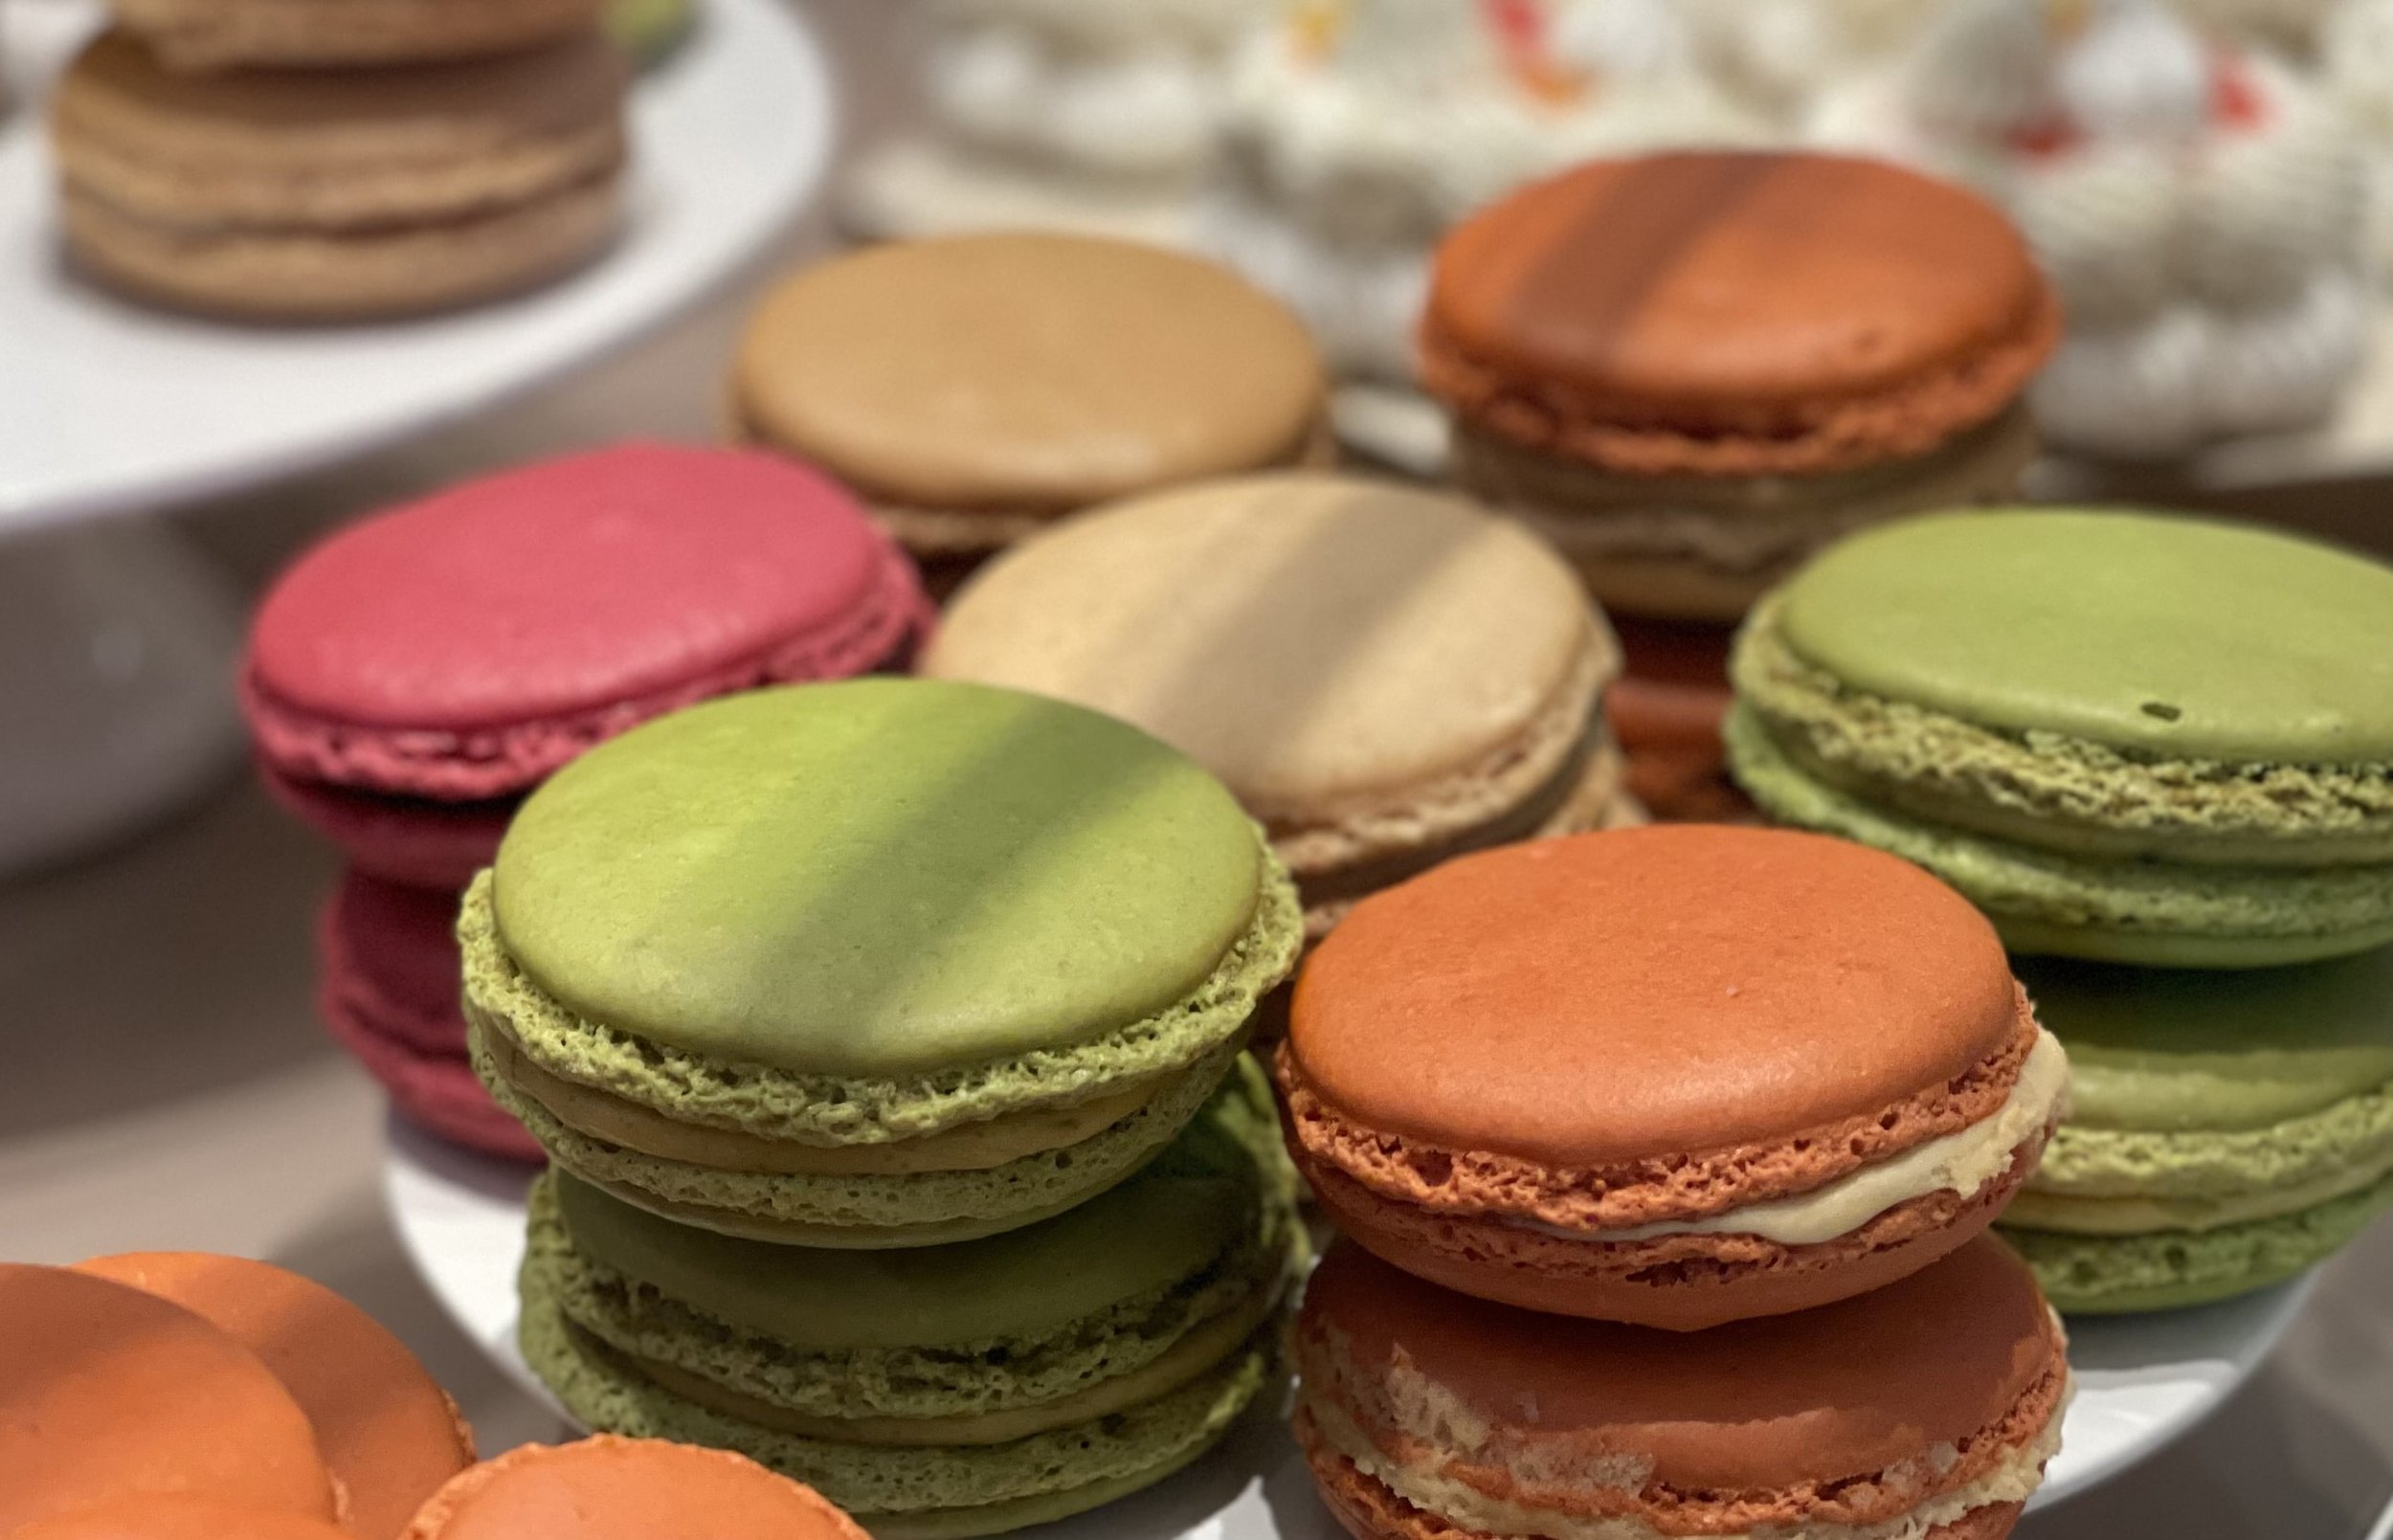 Colorful Macarons, perhaps the most iconic Paris pastry.